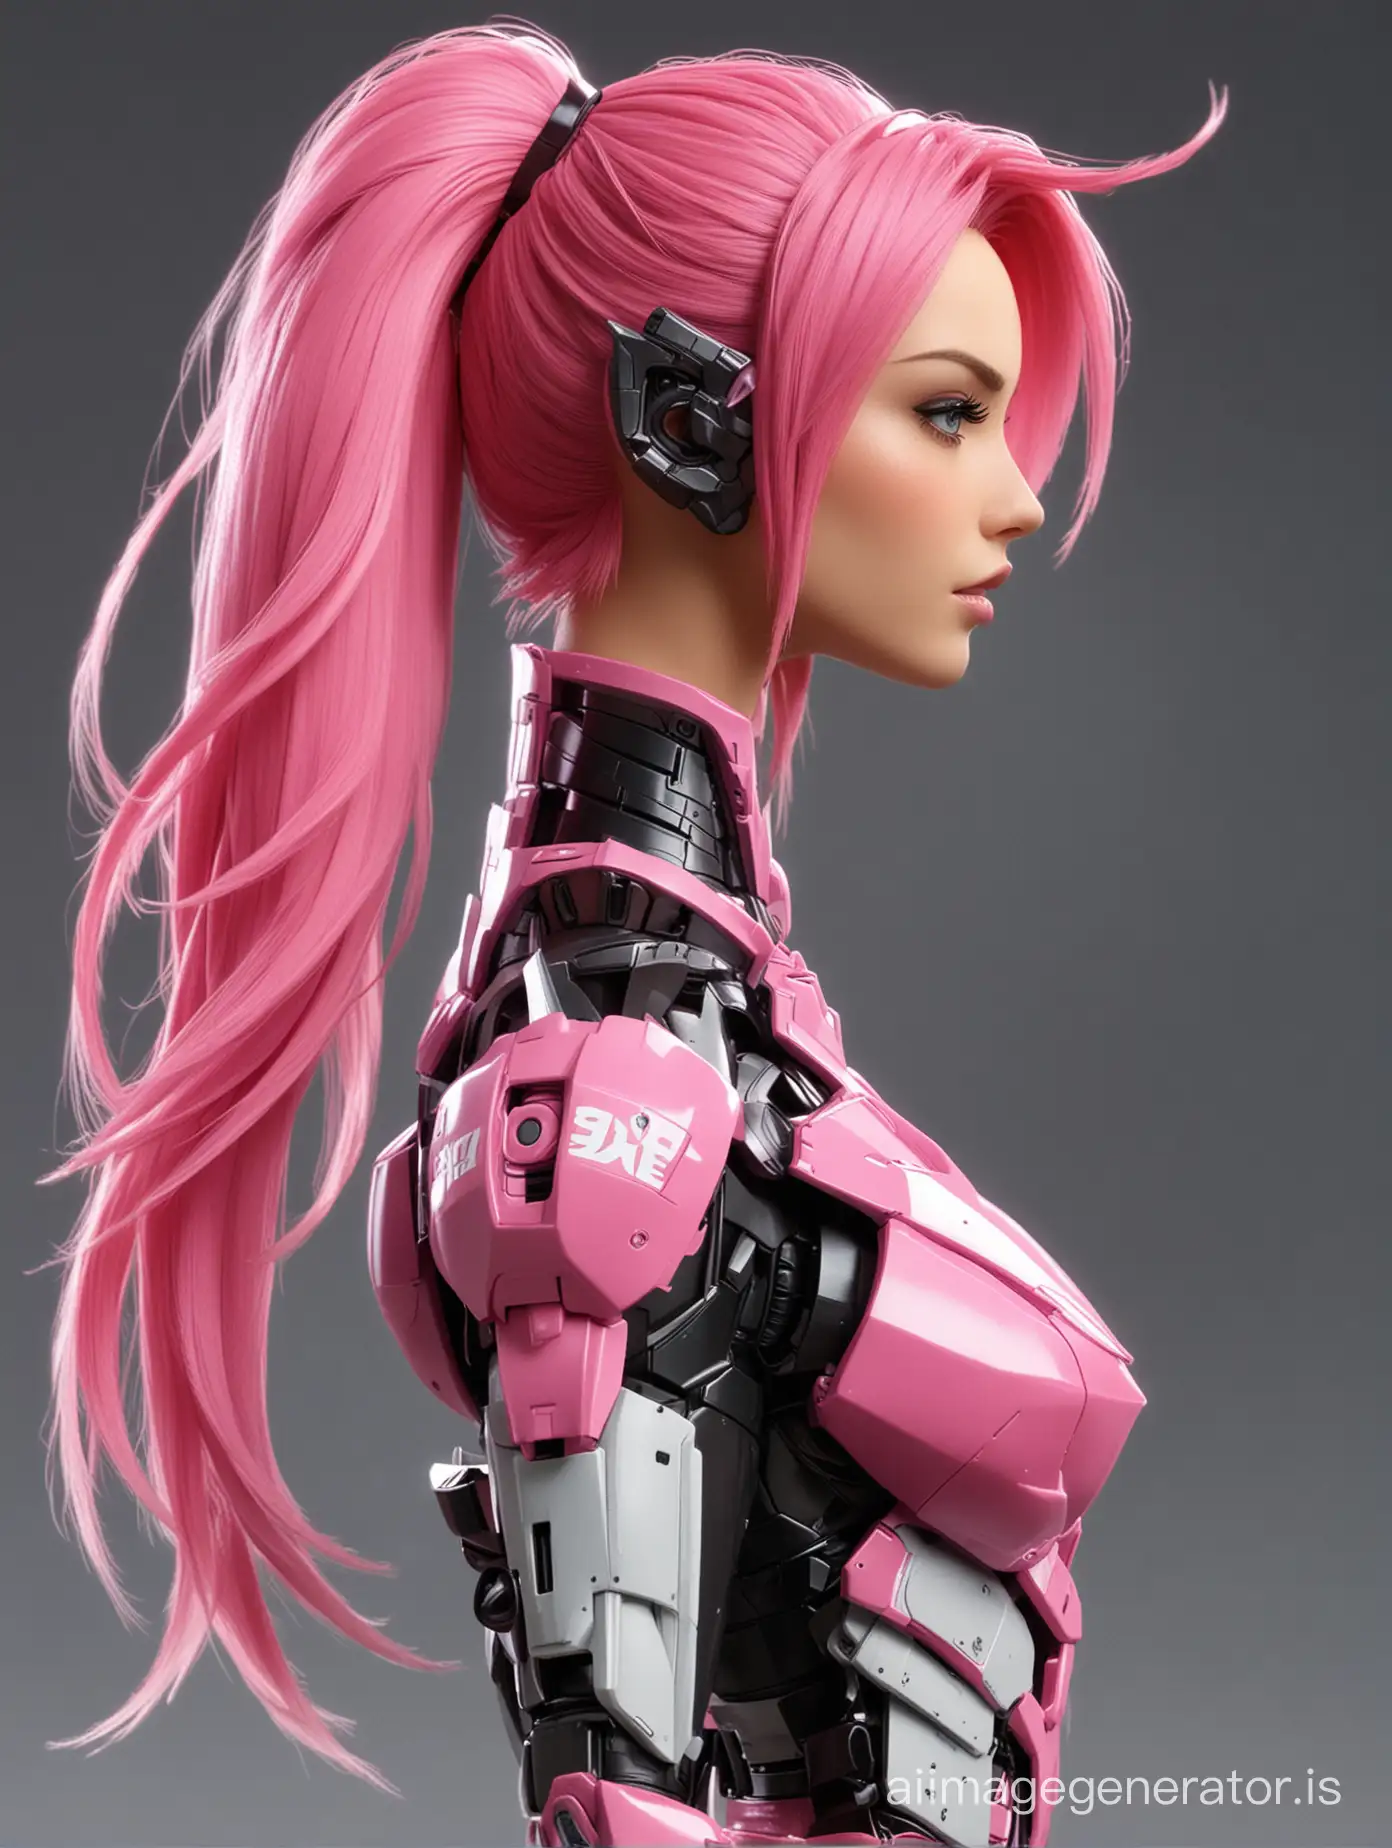 Sexy transformers 'arcee' character, viewed from the side